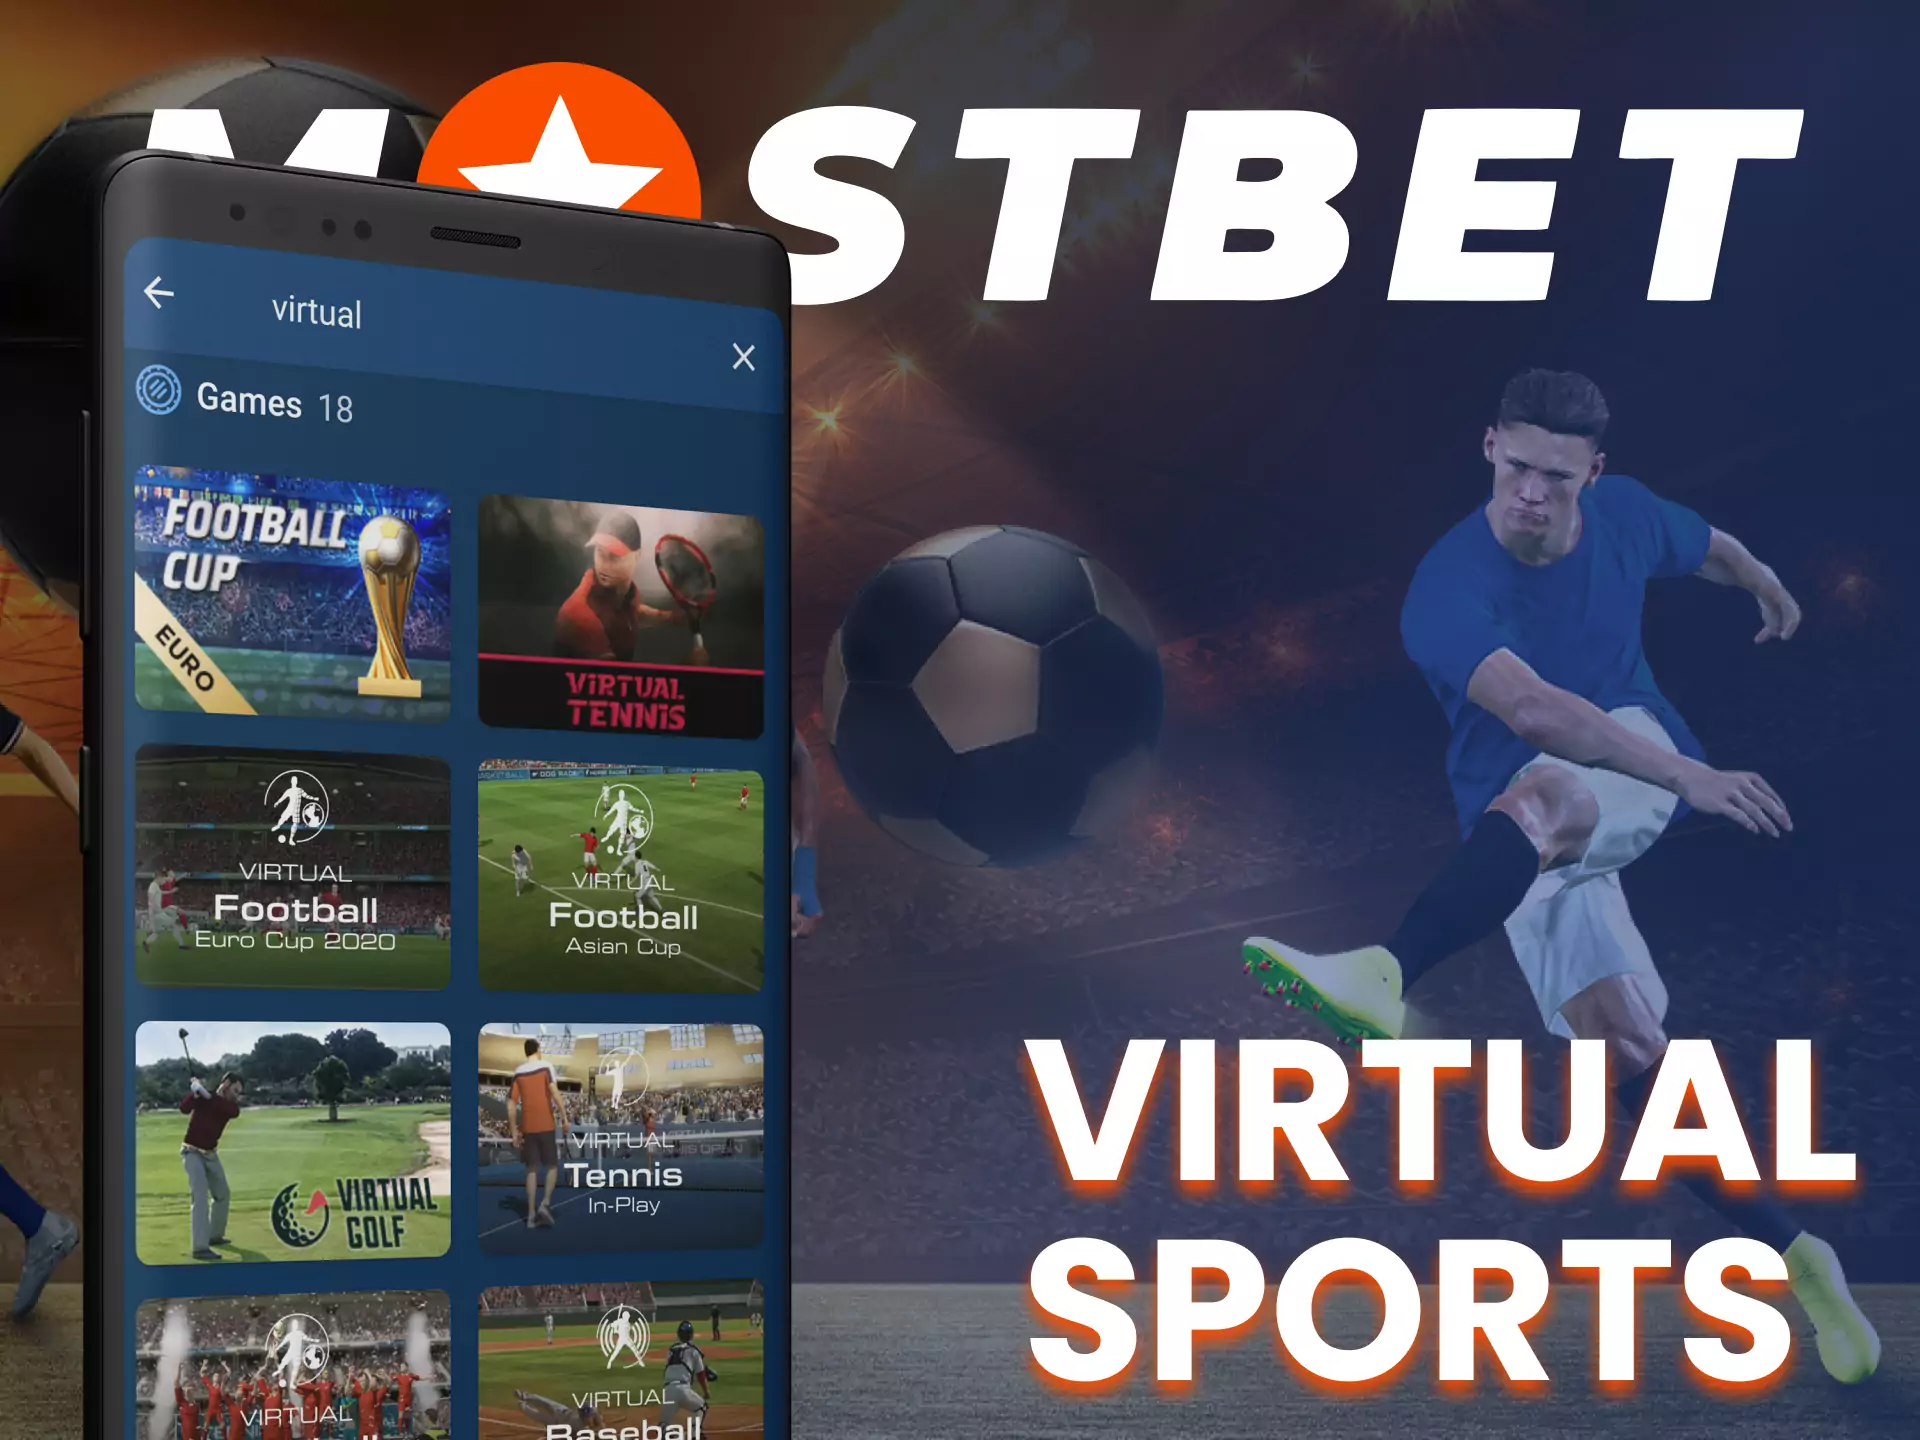 Bet on virtual sports with Mostbet app.